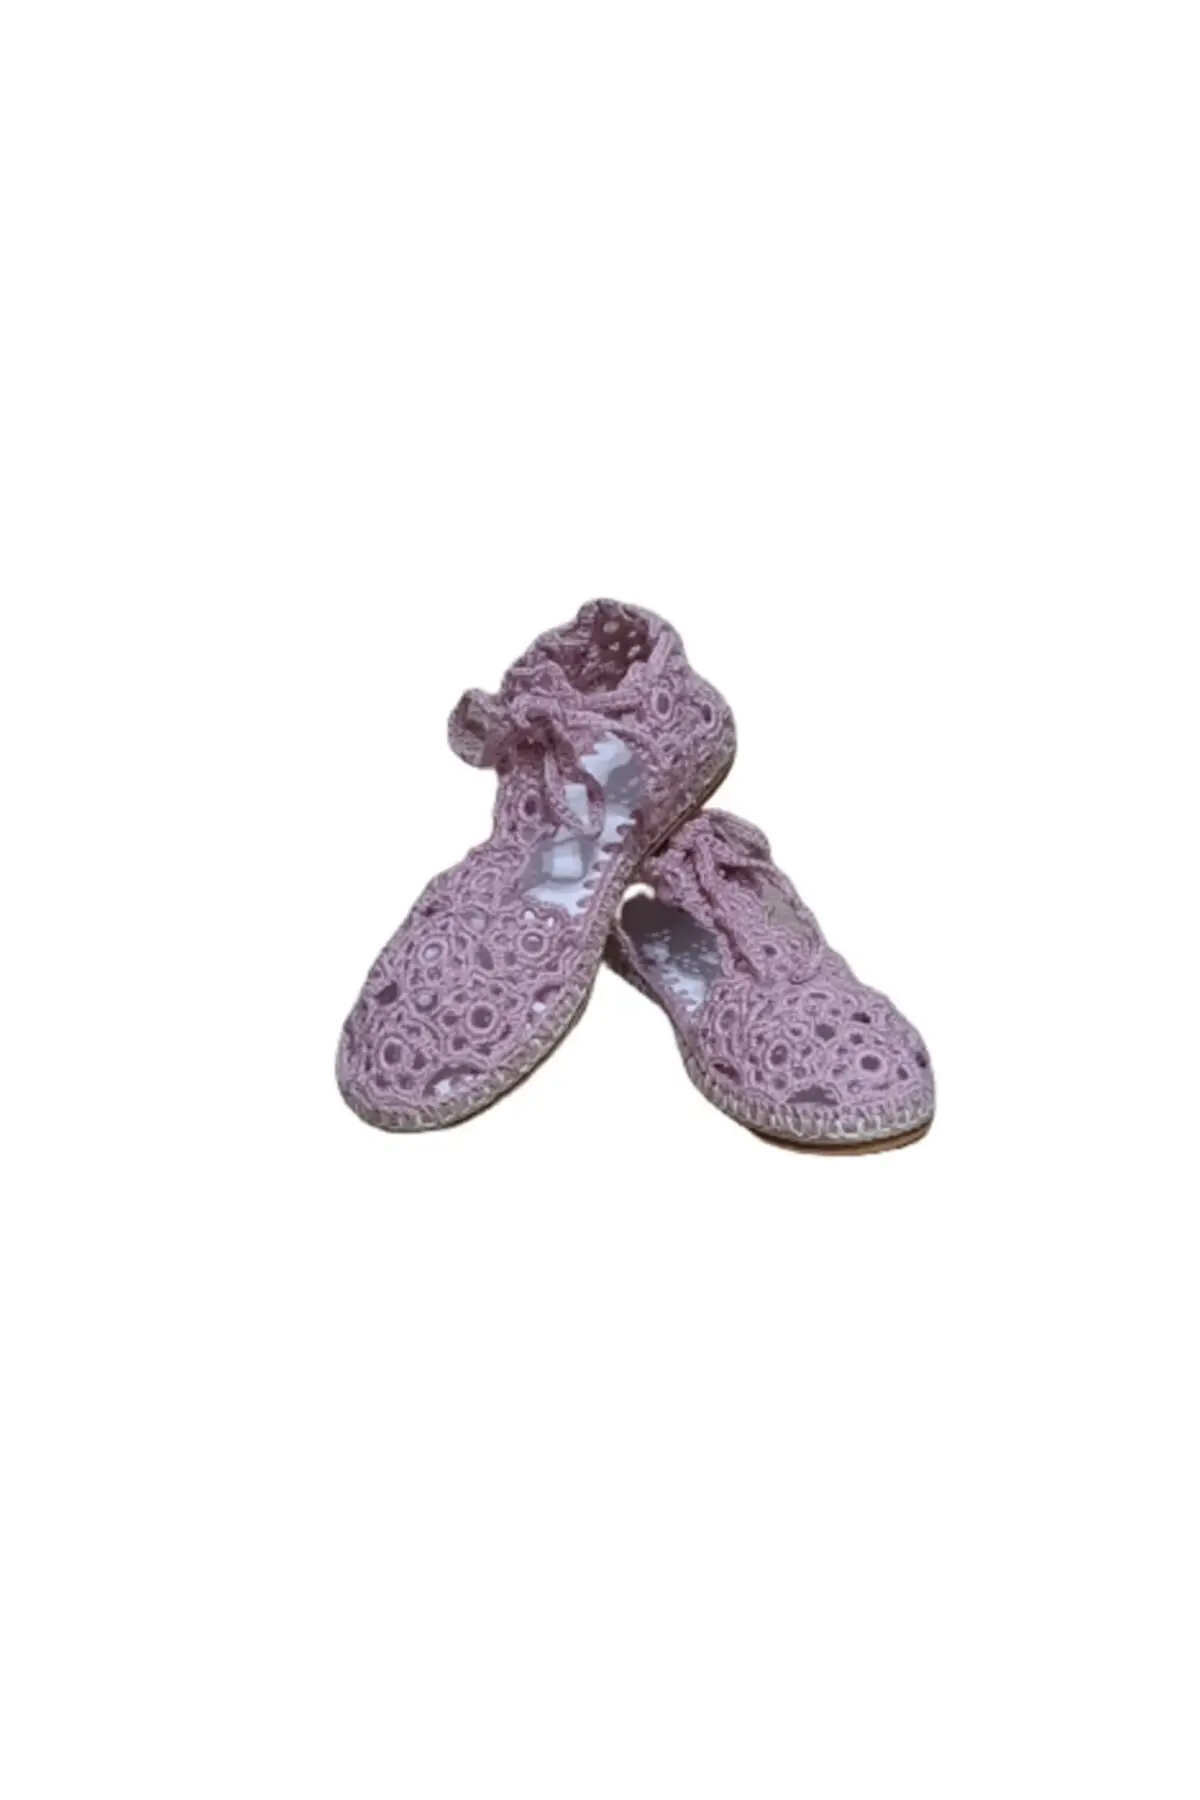 

Women Flats Shoes Lilac Colored Knitted Shoes Fashion Flats For Ladies Casual Shoes Elegant Flat Summer Footwear